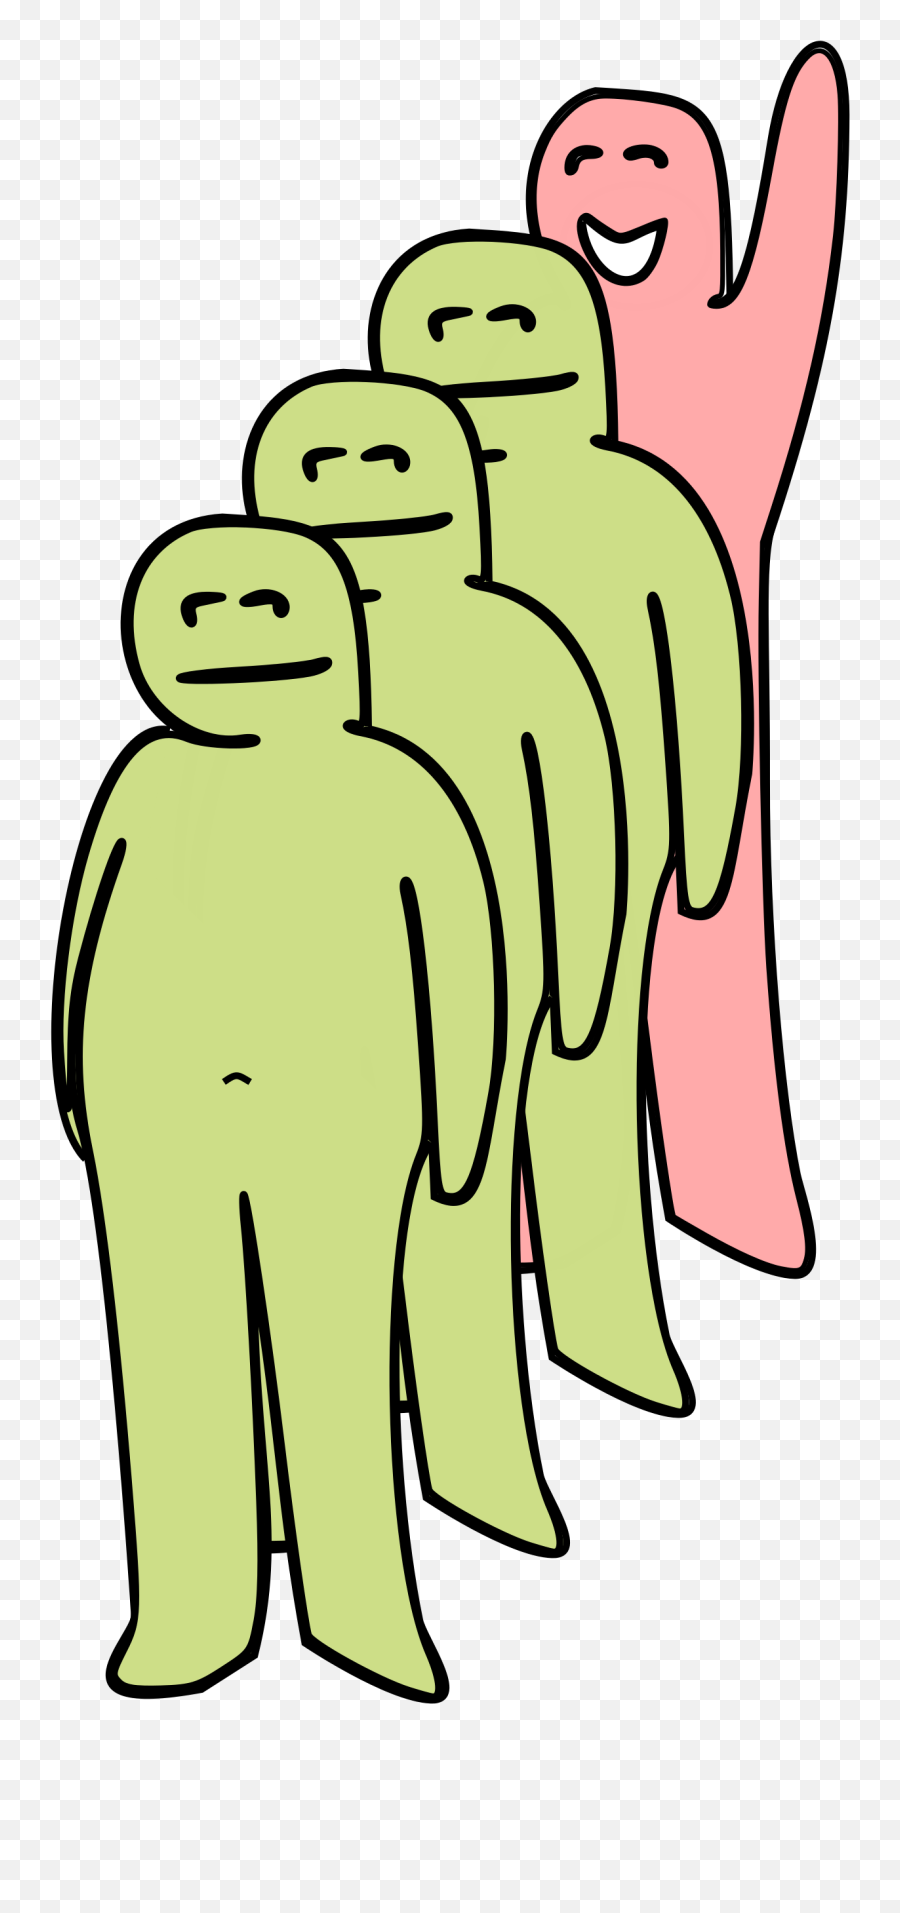 Three Green Smiling Human Figures Standing In A Line - Standing Around Png,Green Line Png